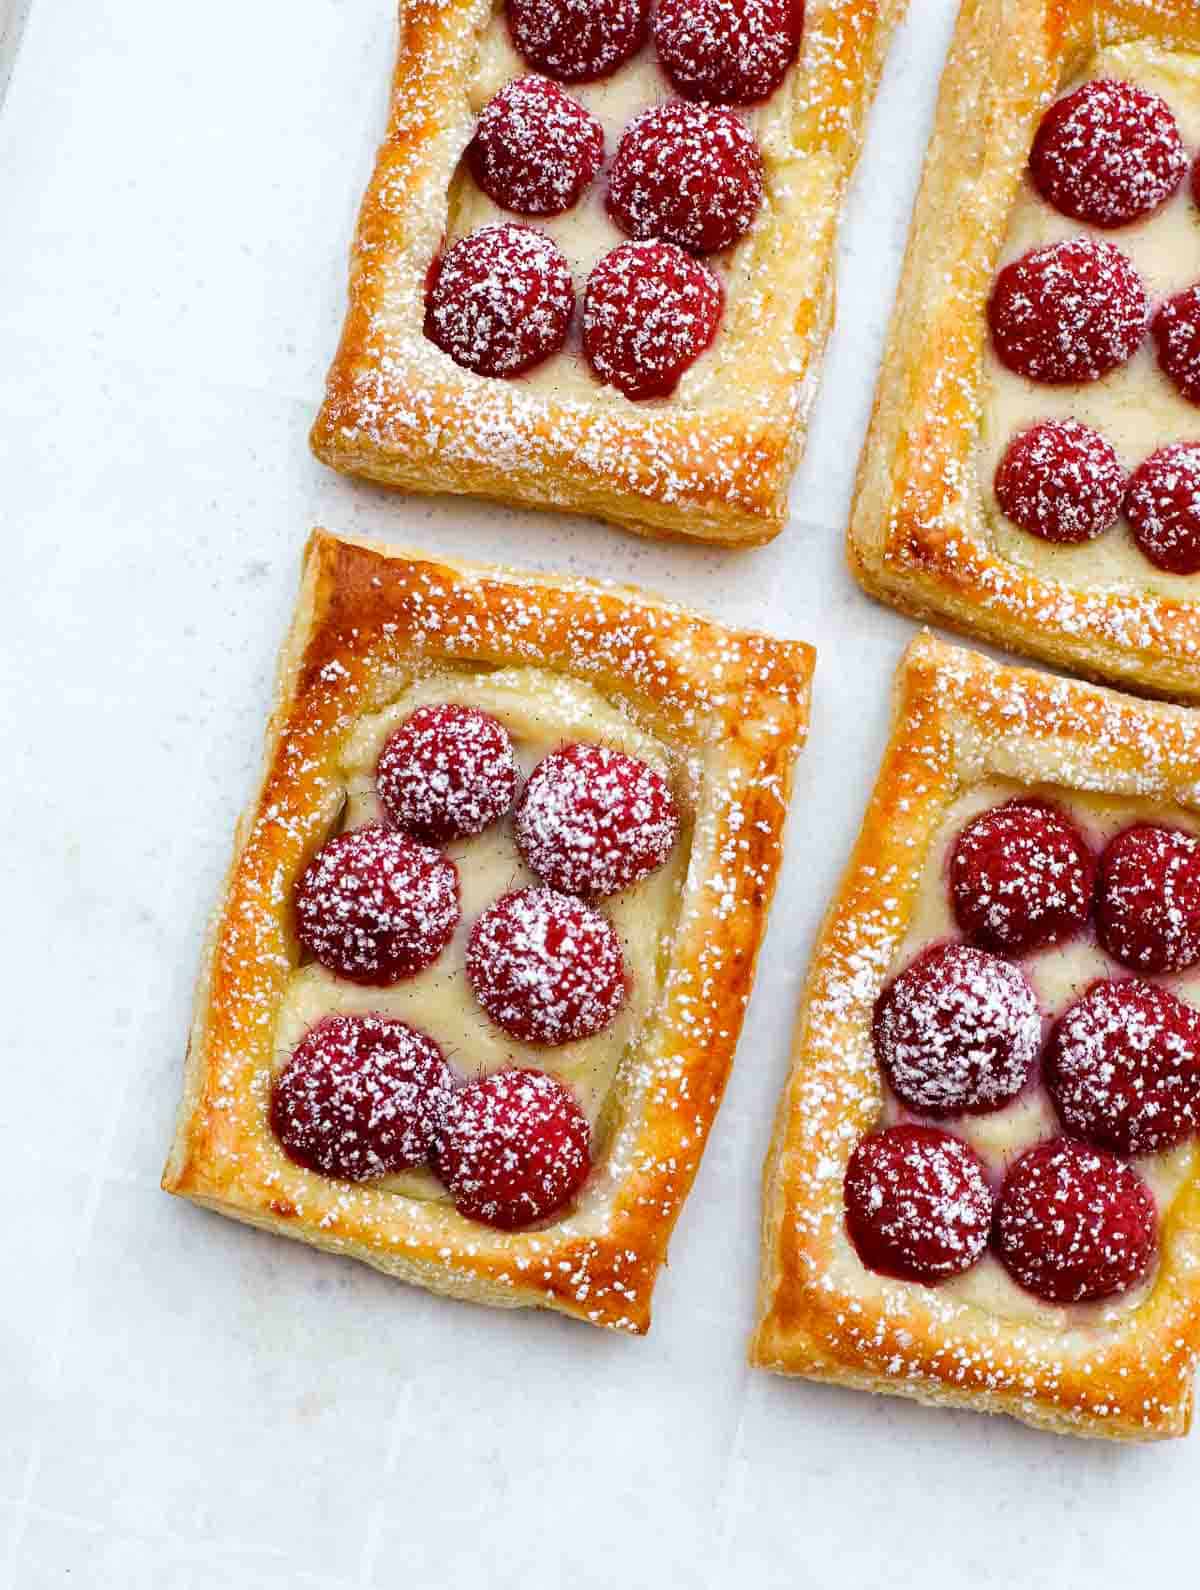 raspberry tart baked on a sheet pan, dusted with powdered sugar